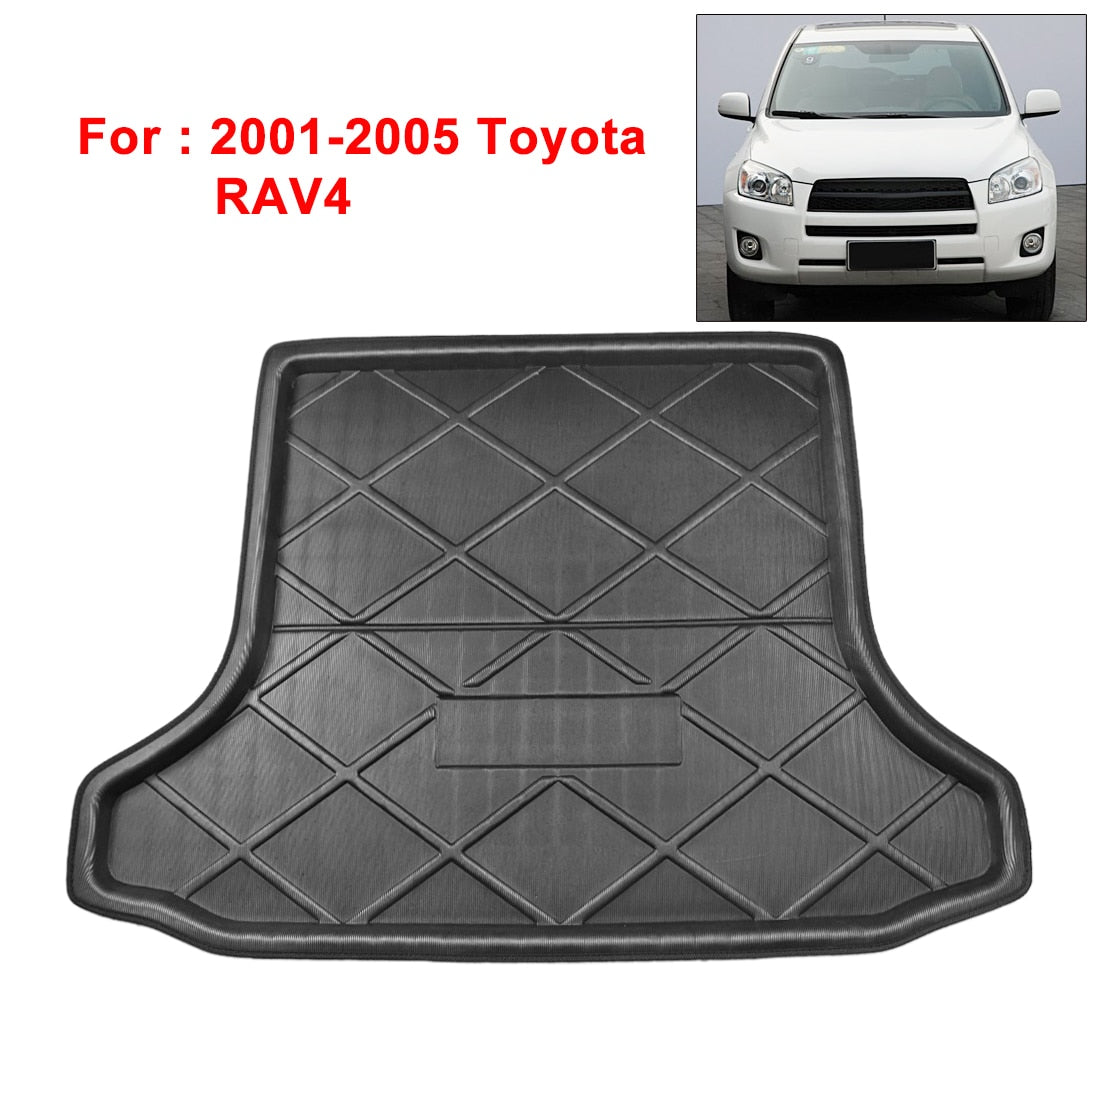 Black Anti-Dirty Rear Trunk Boot Liner Cargo Mat Floor Tray Cover Pad for Toyota RAV4 2001-2005